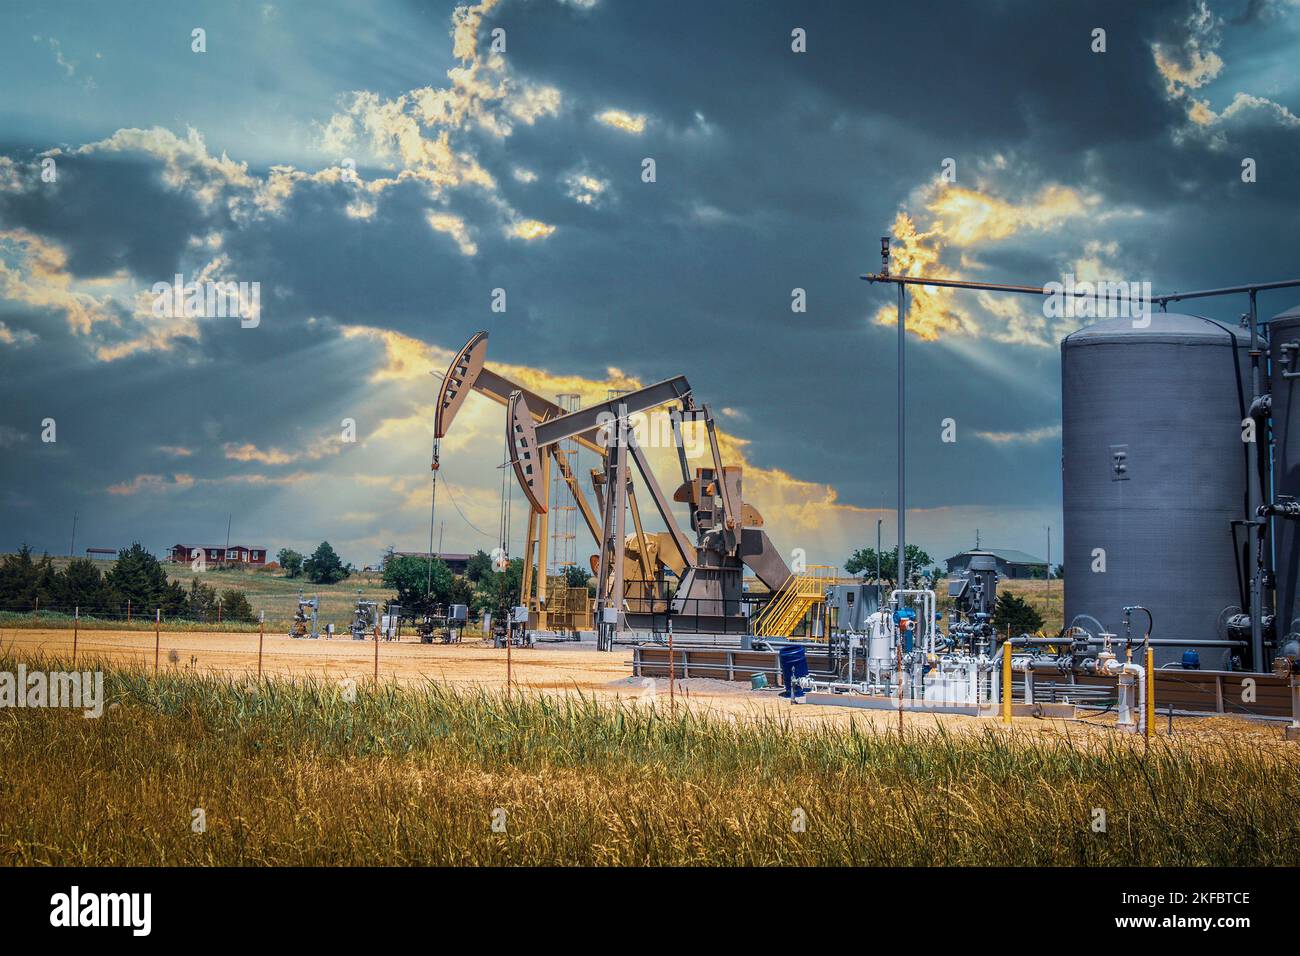 Two pump jacks and tanks and oil field equipment in fenced area in pasture under dramatic skies with houses on hill on horizon - summer Stock Photo